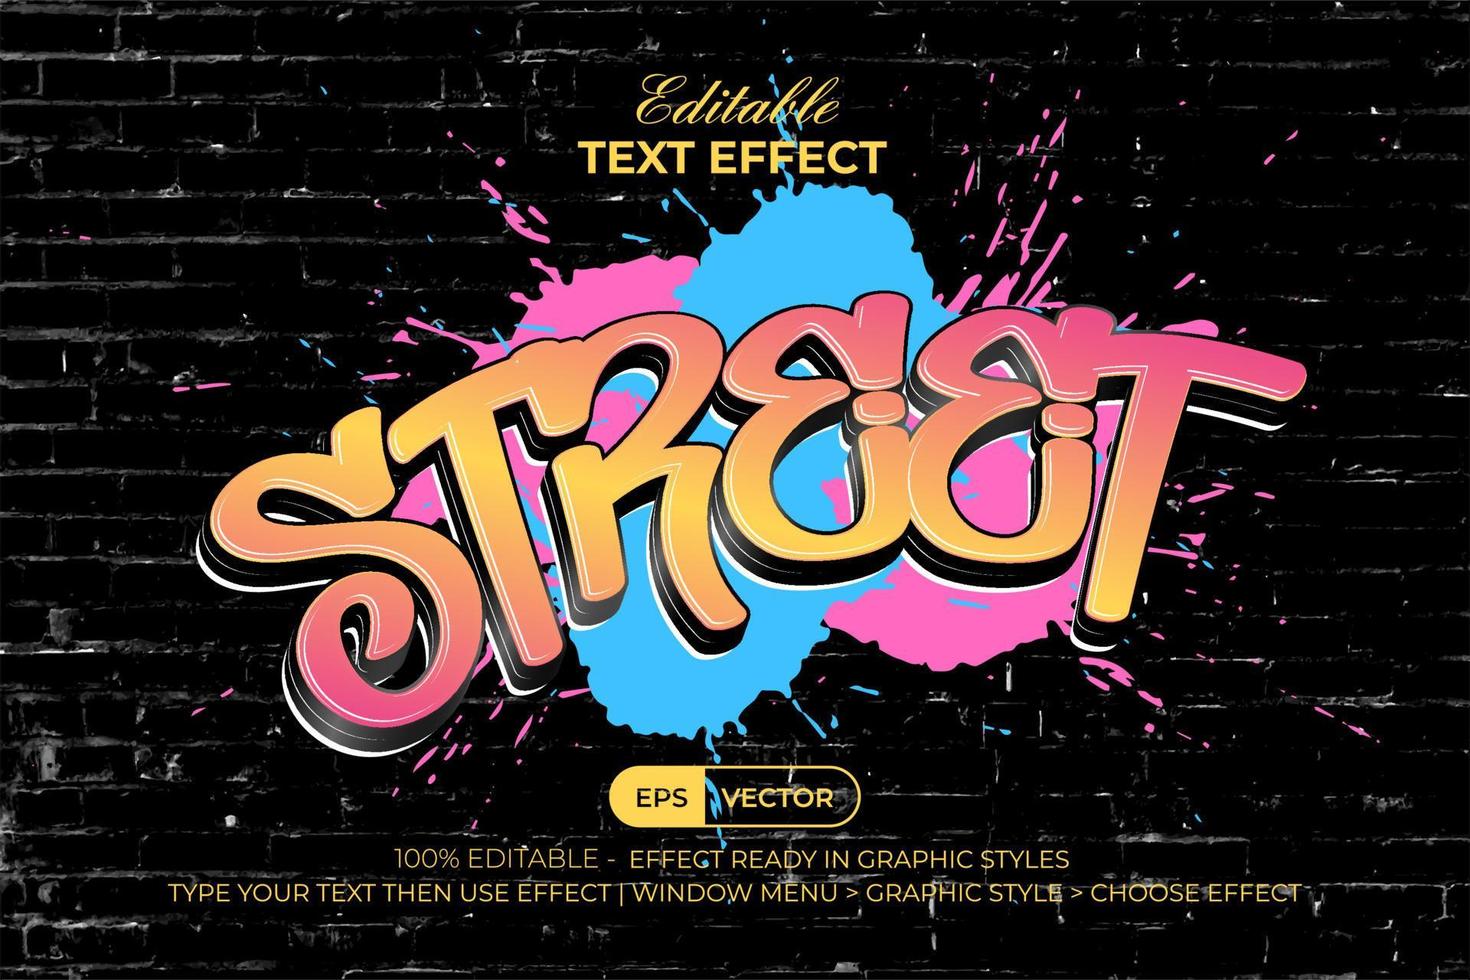 Street graffiti text effect colorful style. Editable text effect with brick wall. vector